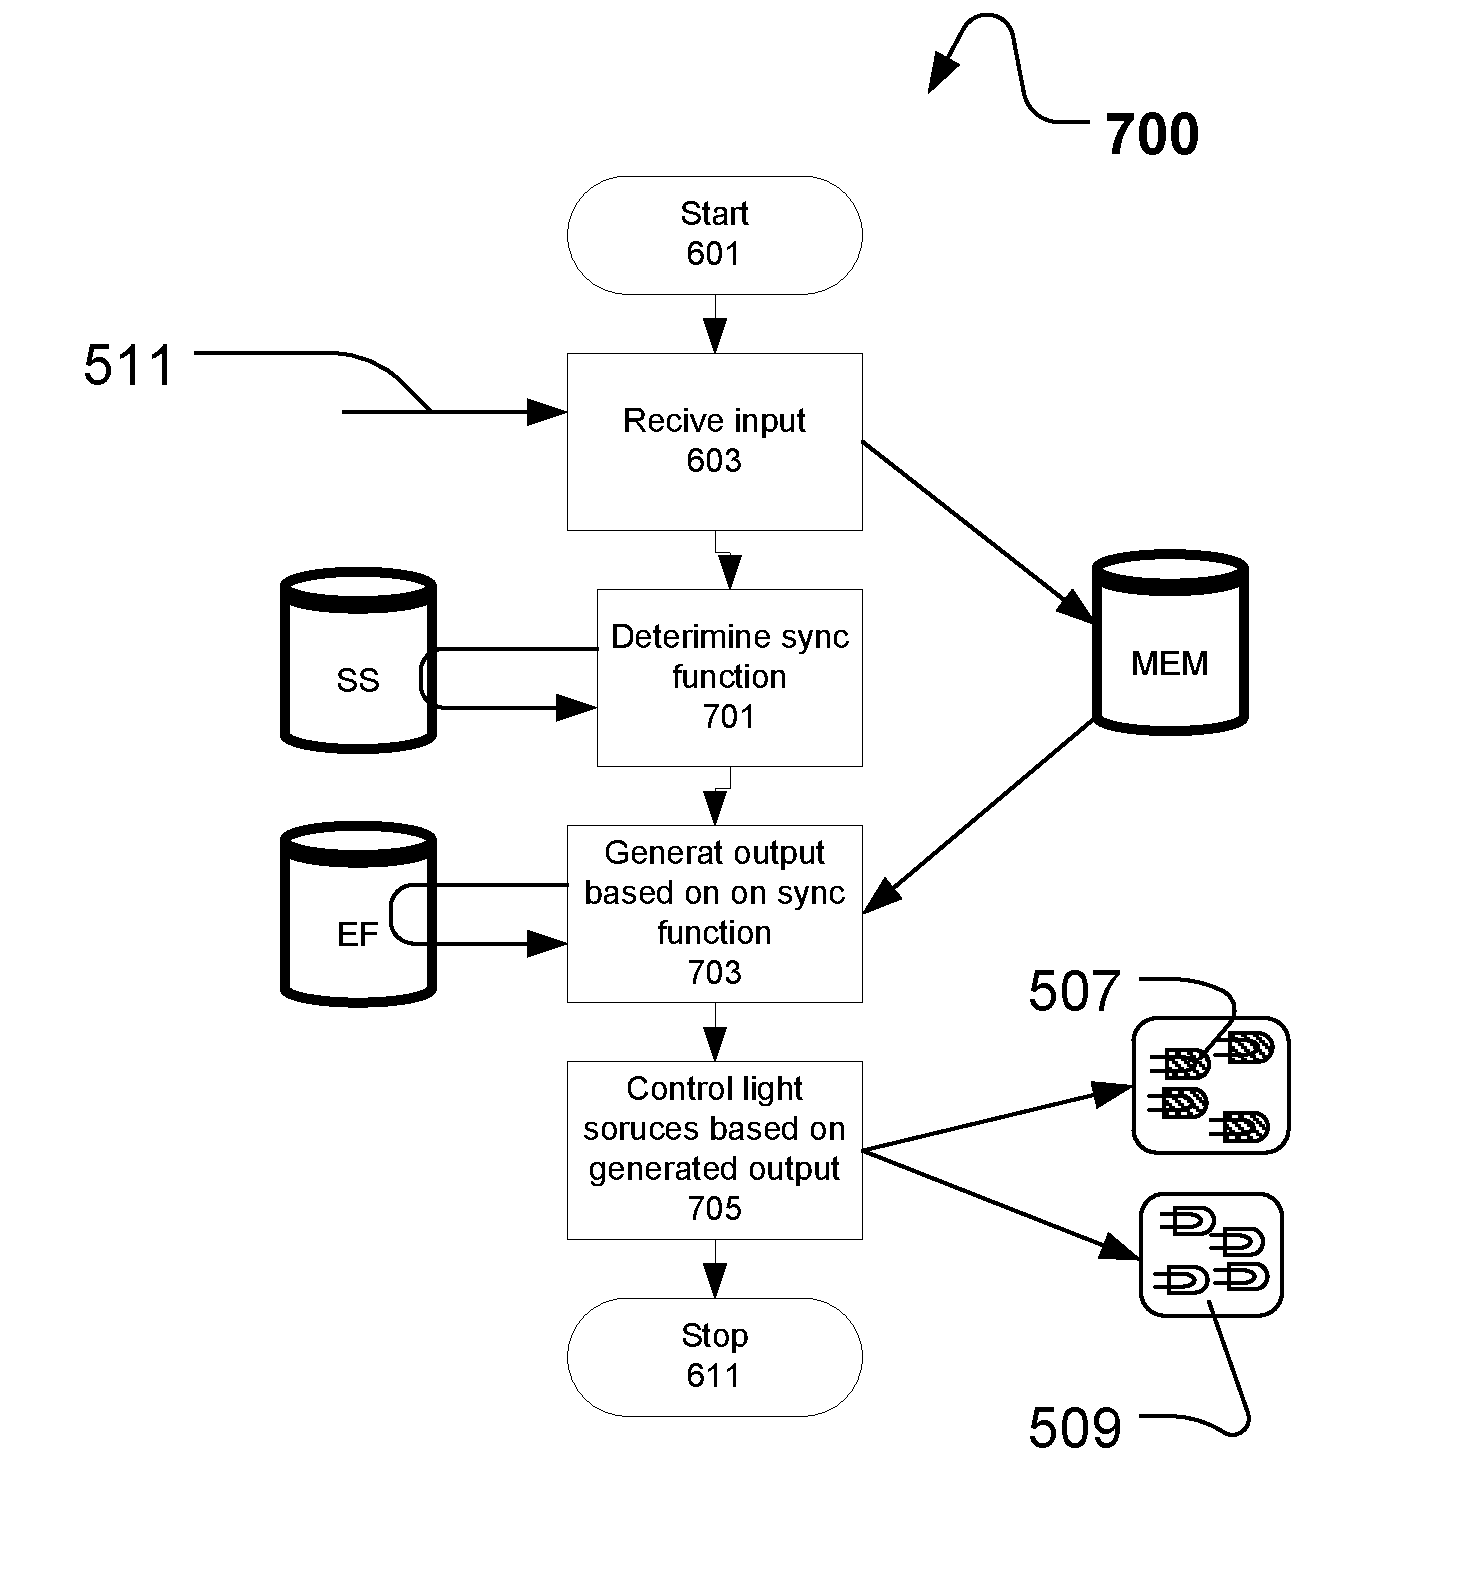 Method of prioritizing and synchronizing effect functions in an illumination device